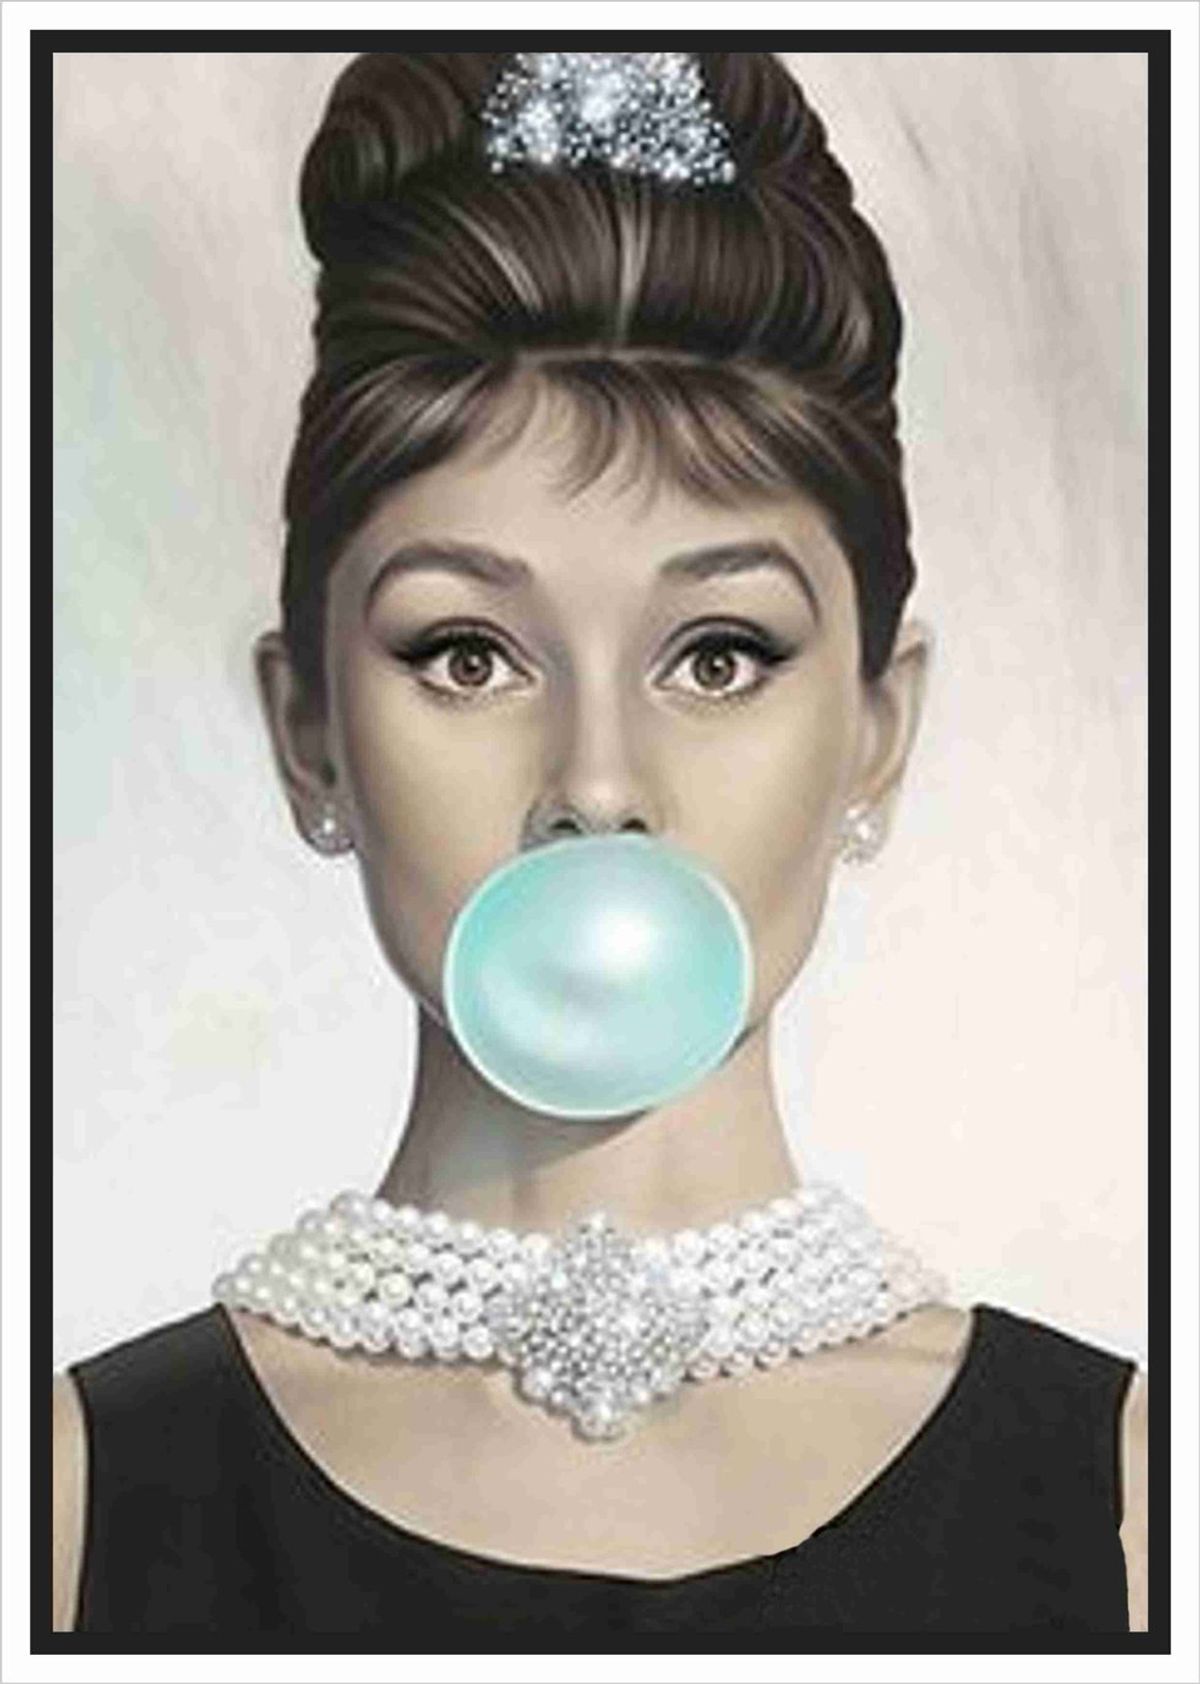 The Top 10 Reasons Why Women Of The Modern Age Believe Audrey Hepburn Is The Ultimate 'Boss'